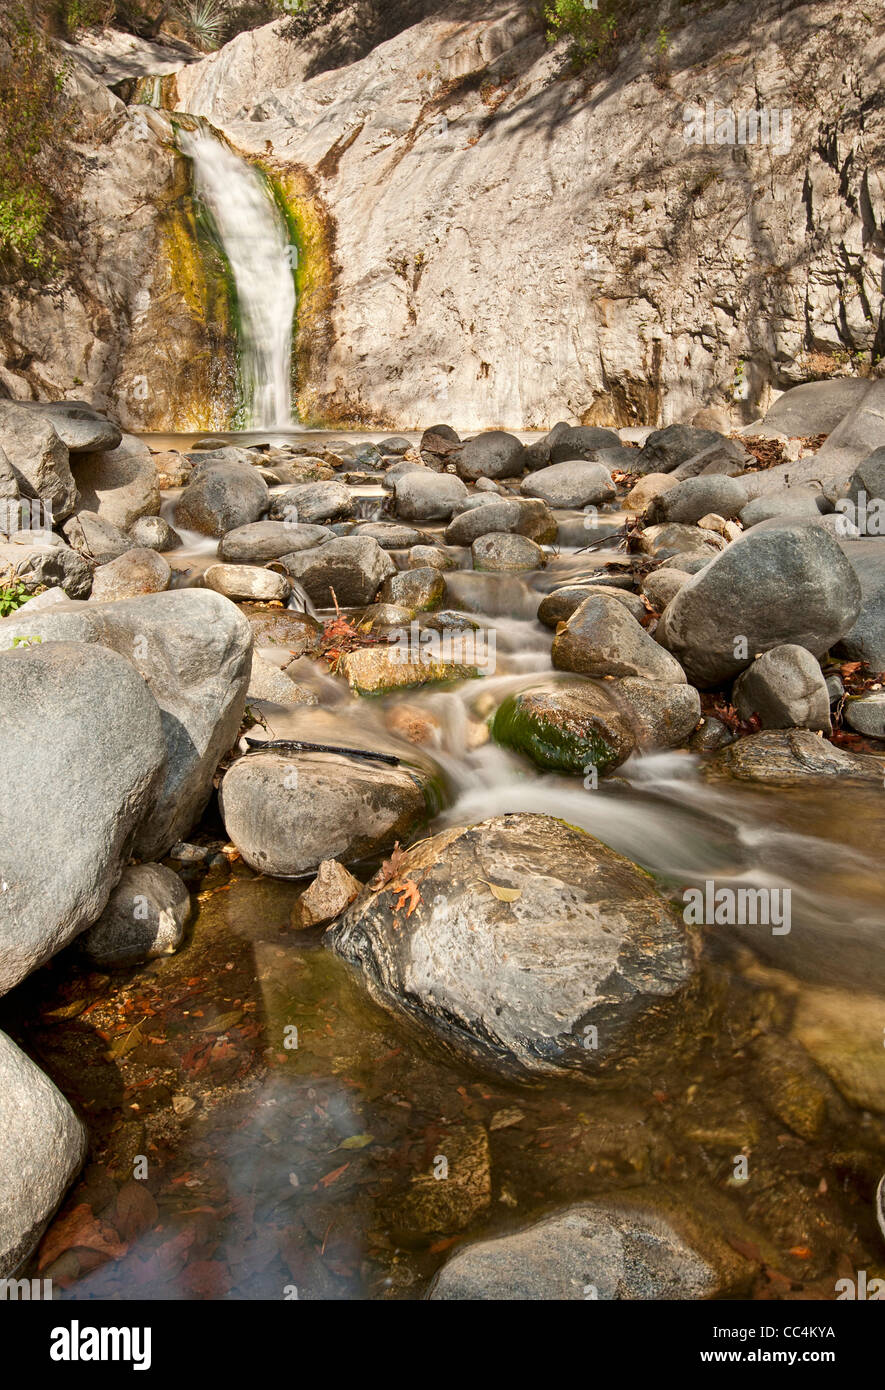 Hiking to Switzer Falls in the Angeles National Forest in the San Gabriel Mountains. Stock Photo